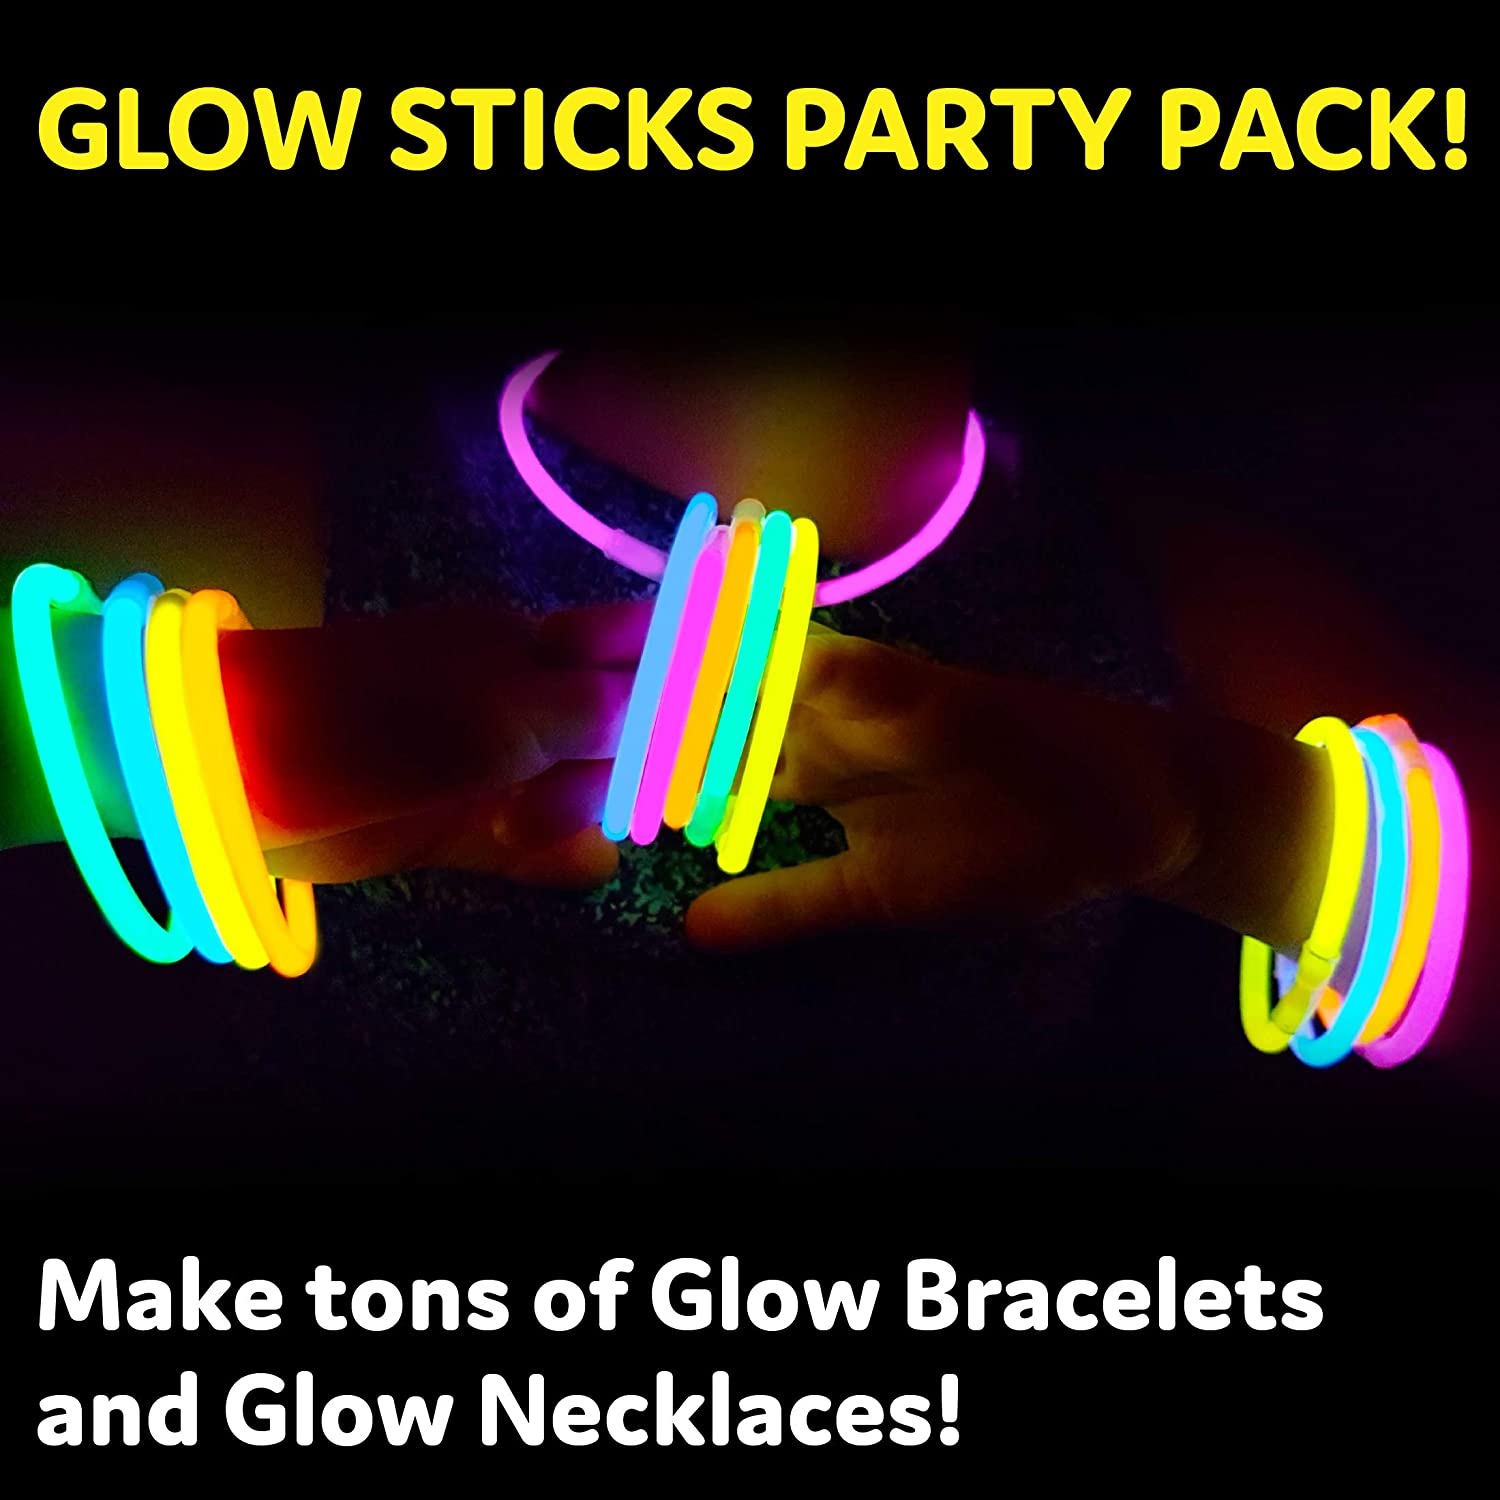 PartySticks Glow Sticks Party Supplies 100pk - 8 Inch Glow in the Dark Light Up Sticks Party Favors, Glow Party Decorations, Neon Party Glow Necklaces and Glow Bracelets with Connectors - image 5 of 7